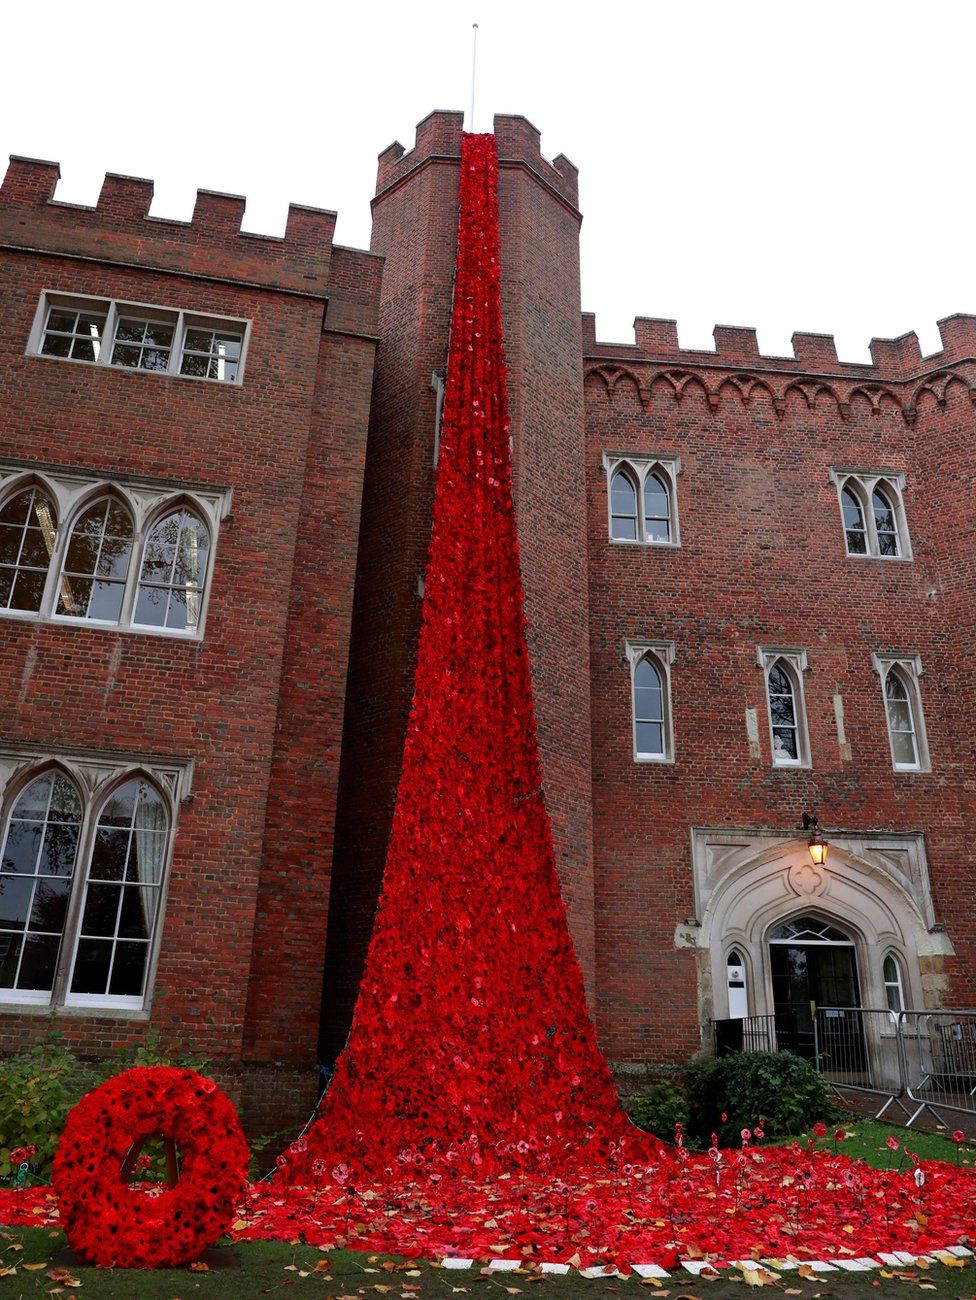 More than 15,000 poppies - knitted by the Secret Society of Hertford Crafters as well as schoolchildren and people in care homes, pour down Hertford Castle